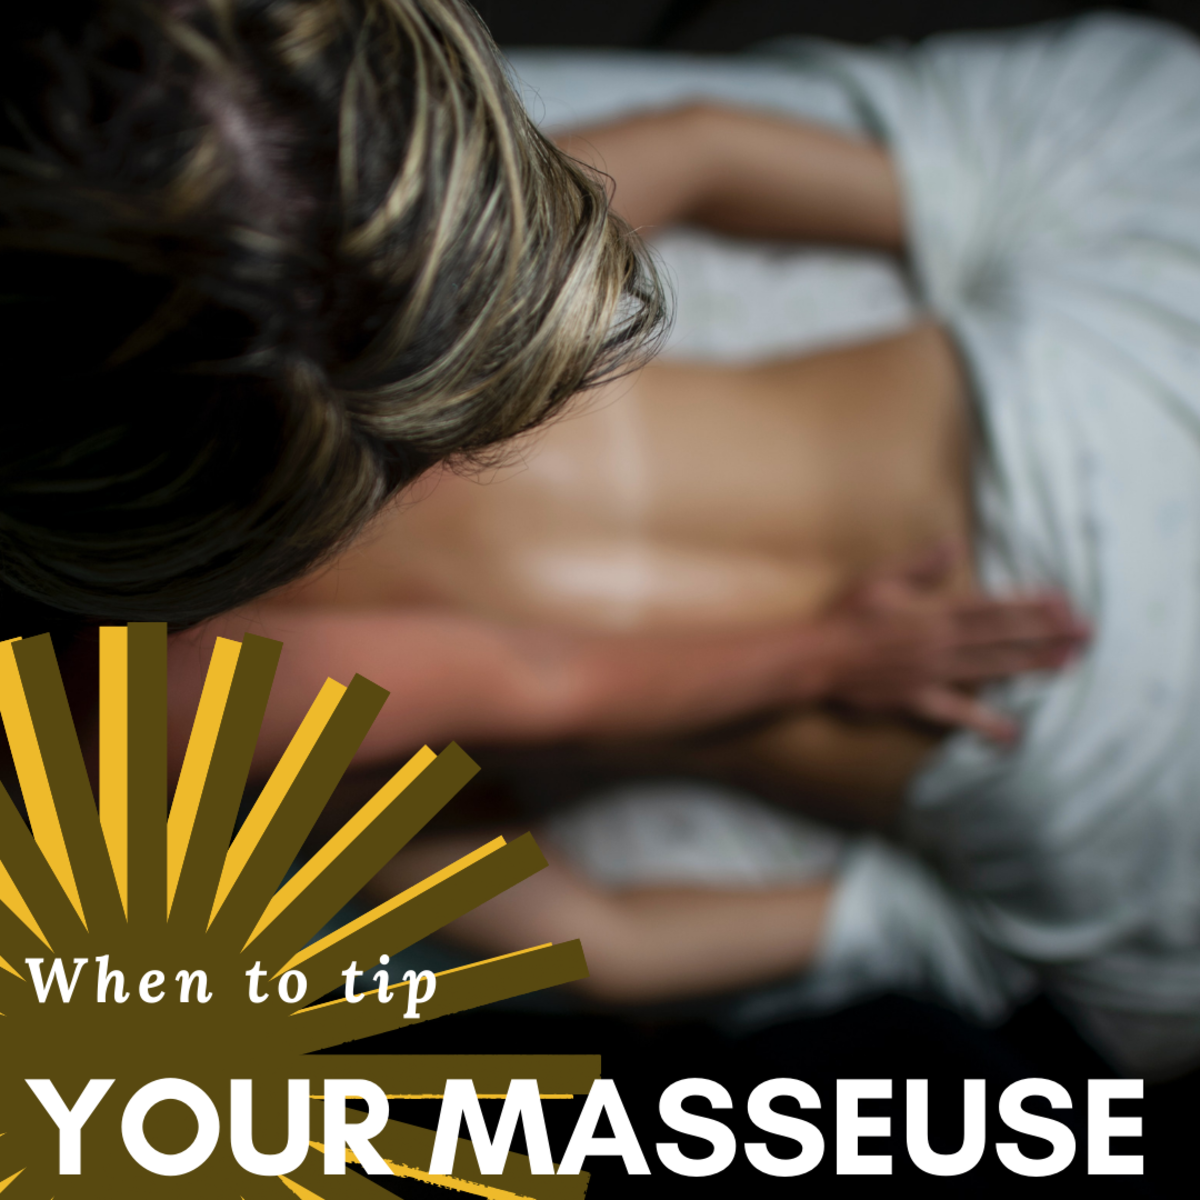 When to Tip Your Masseuse